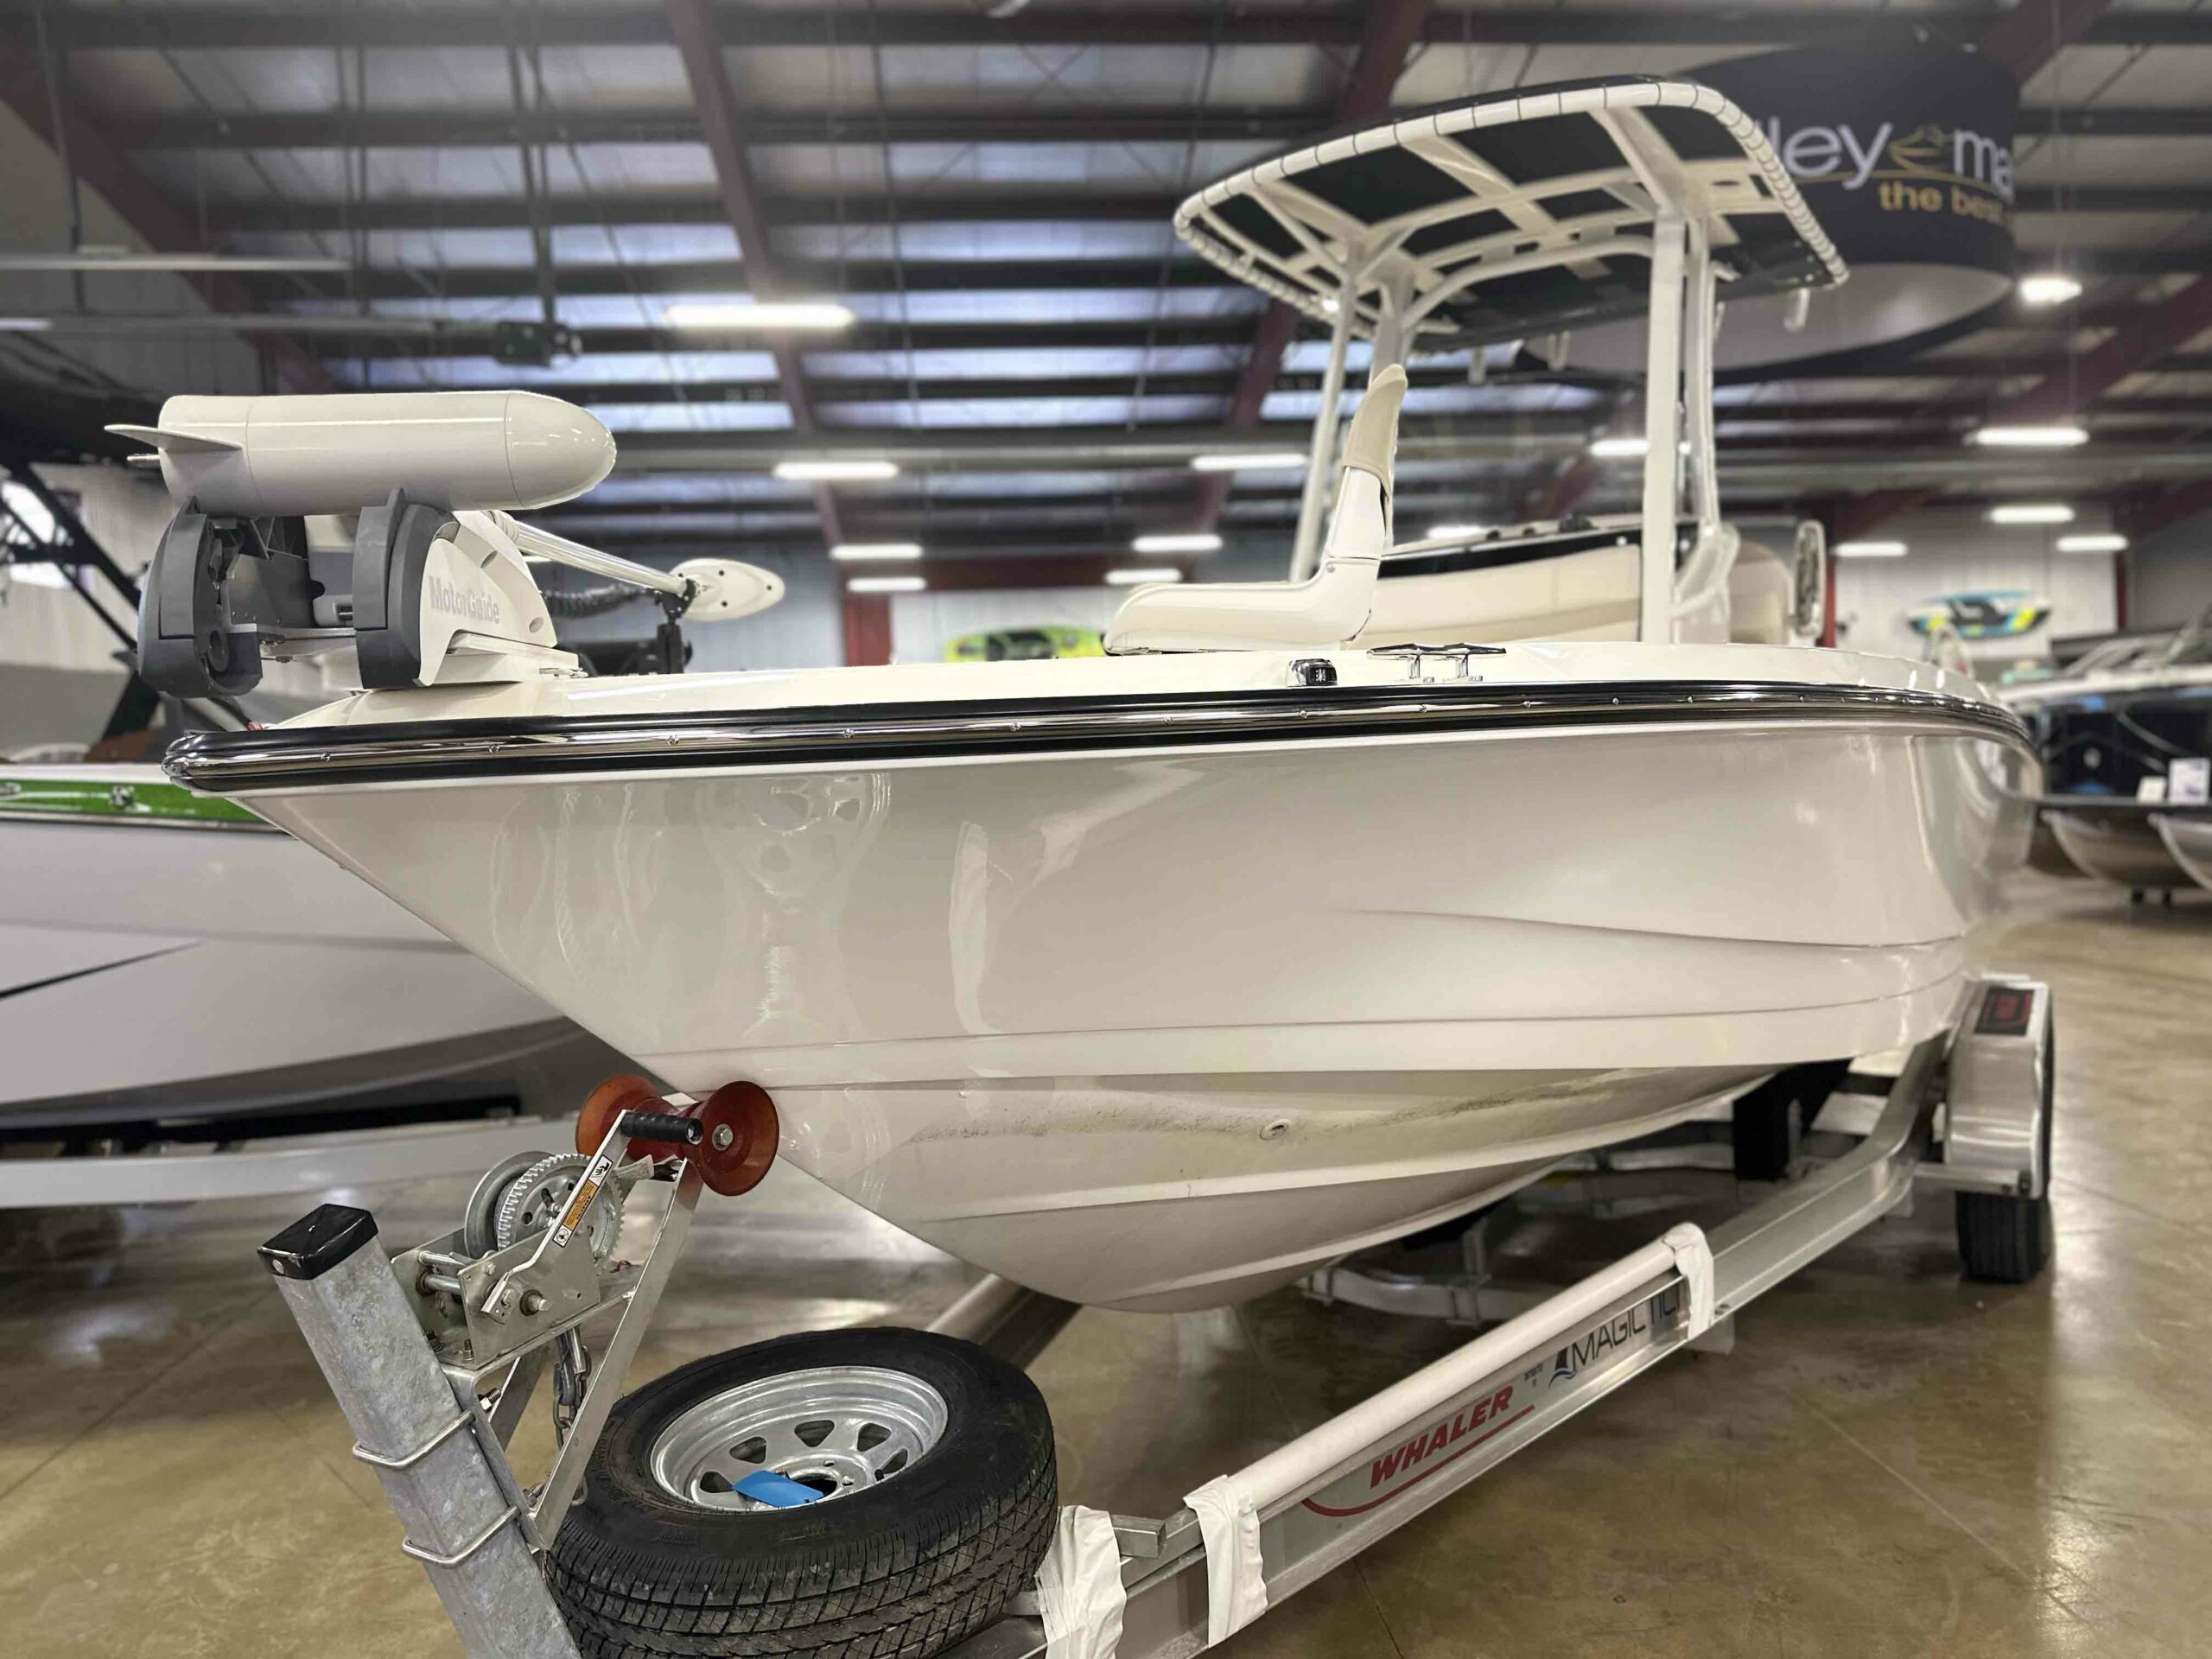 This is the bow of a 2023 Boston Whaler 220 Dauntless.